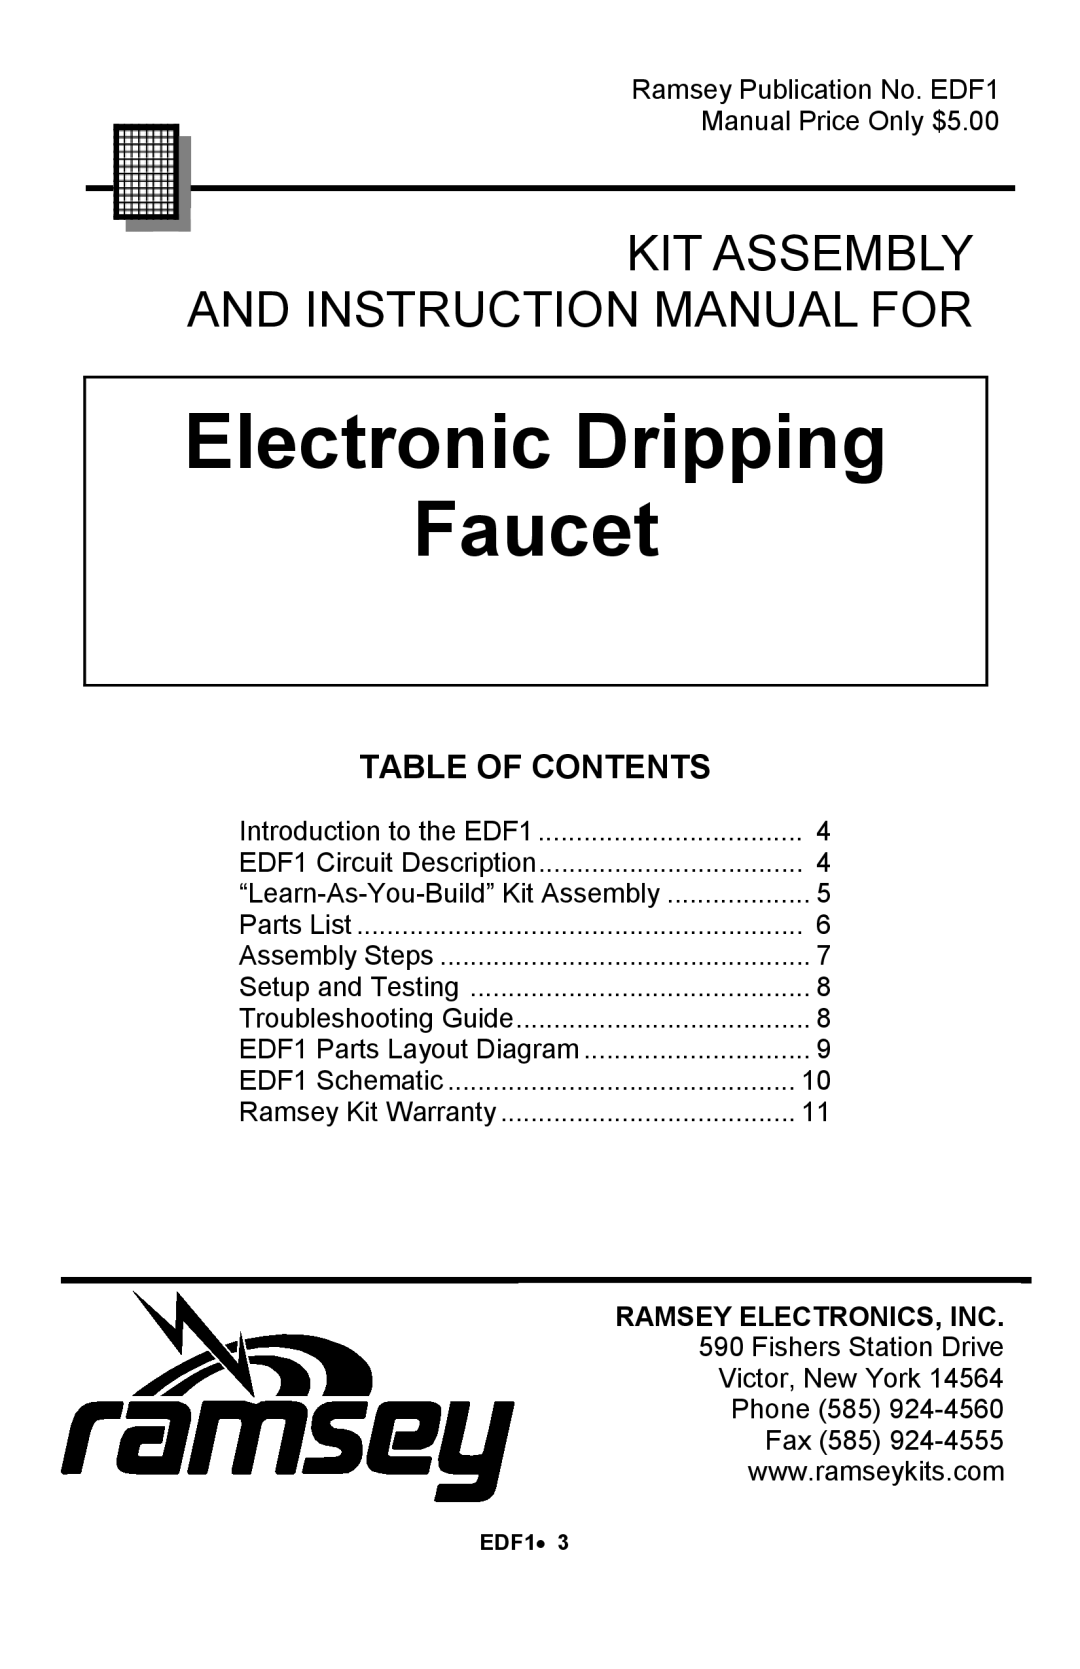 Ramsey Electronics Electronic Dripping Faucet, EDF1 manual Table Of Contents, Kit Assembly 